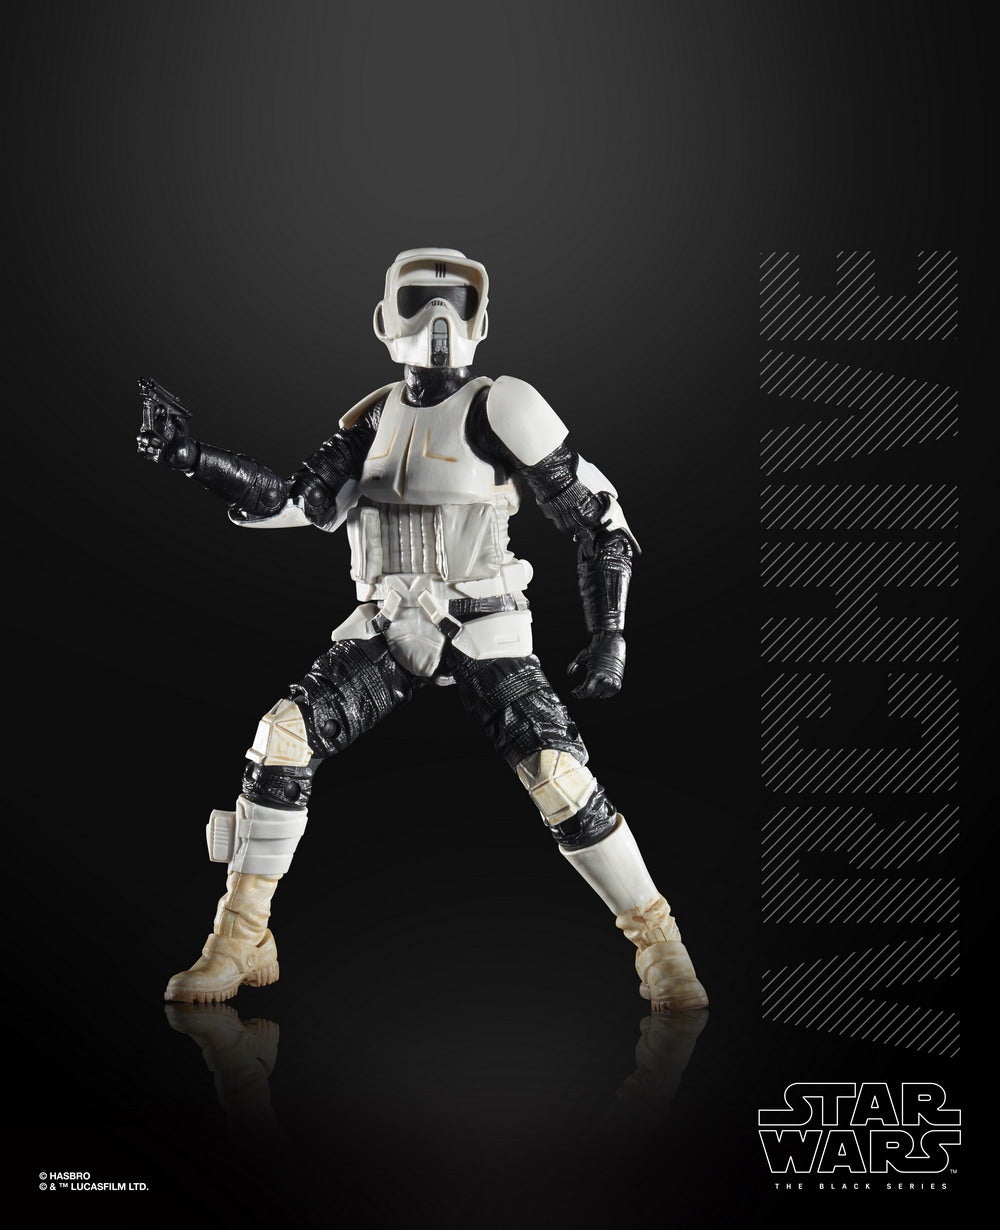 STAR WARS THE BLACK SERIES ARCHIVE 6-INCH Figure Assortment - Scout Trooper (oop 1)